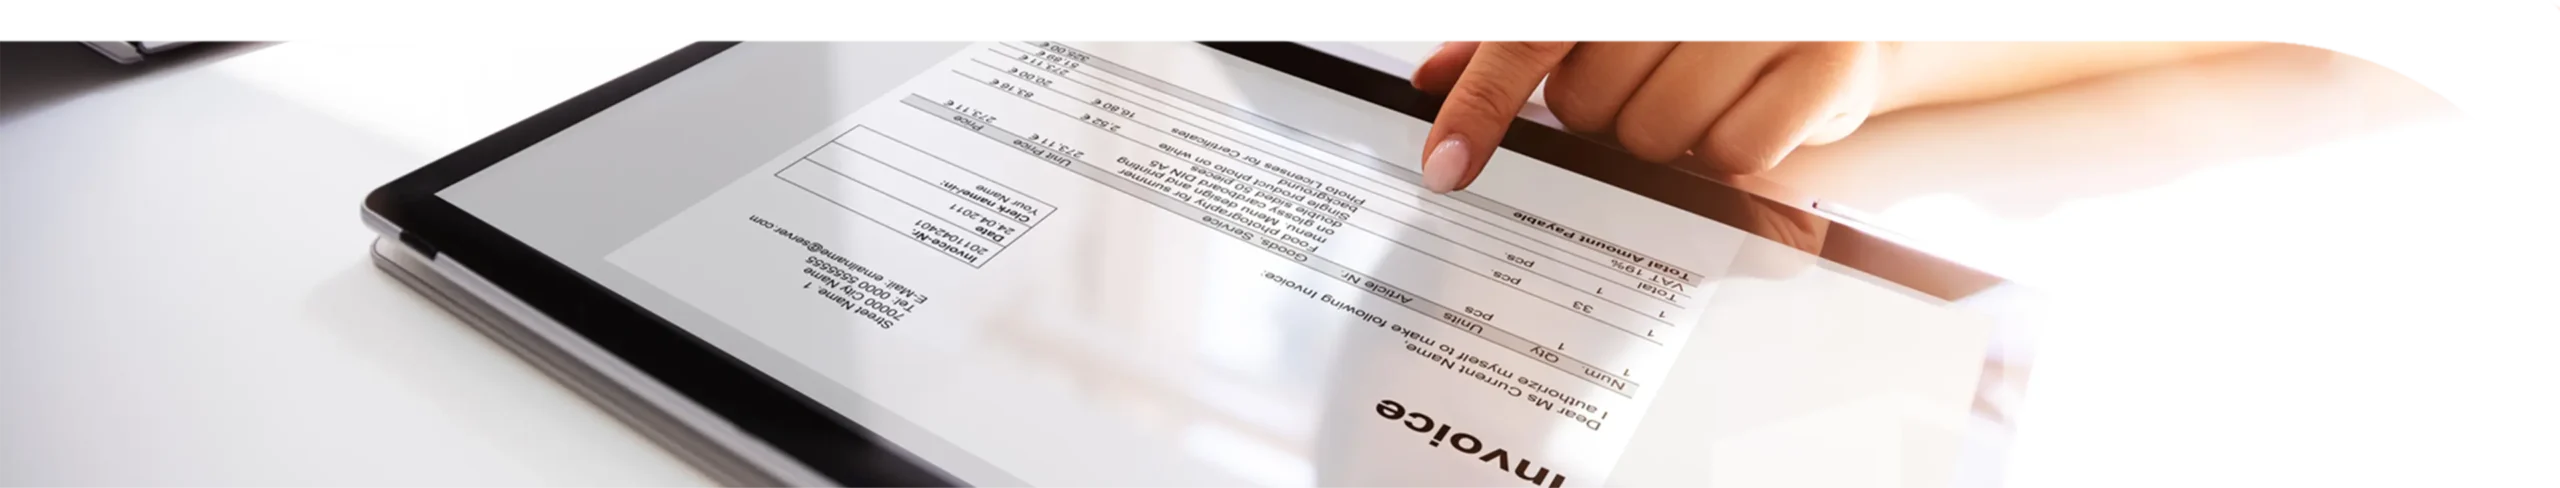 A tablet with an image of an invoice on it